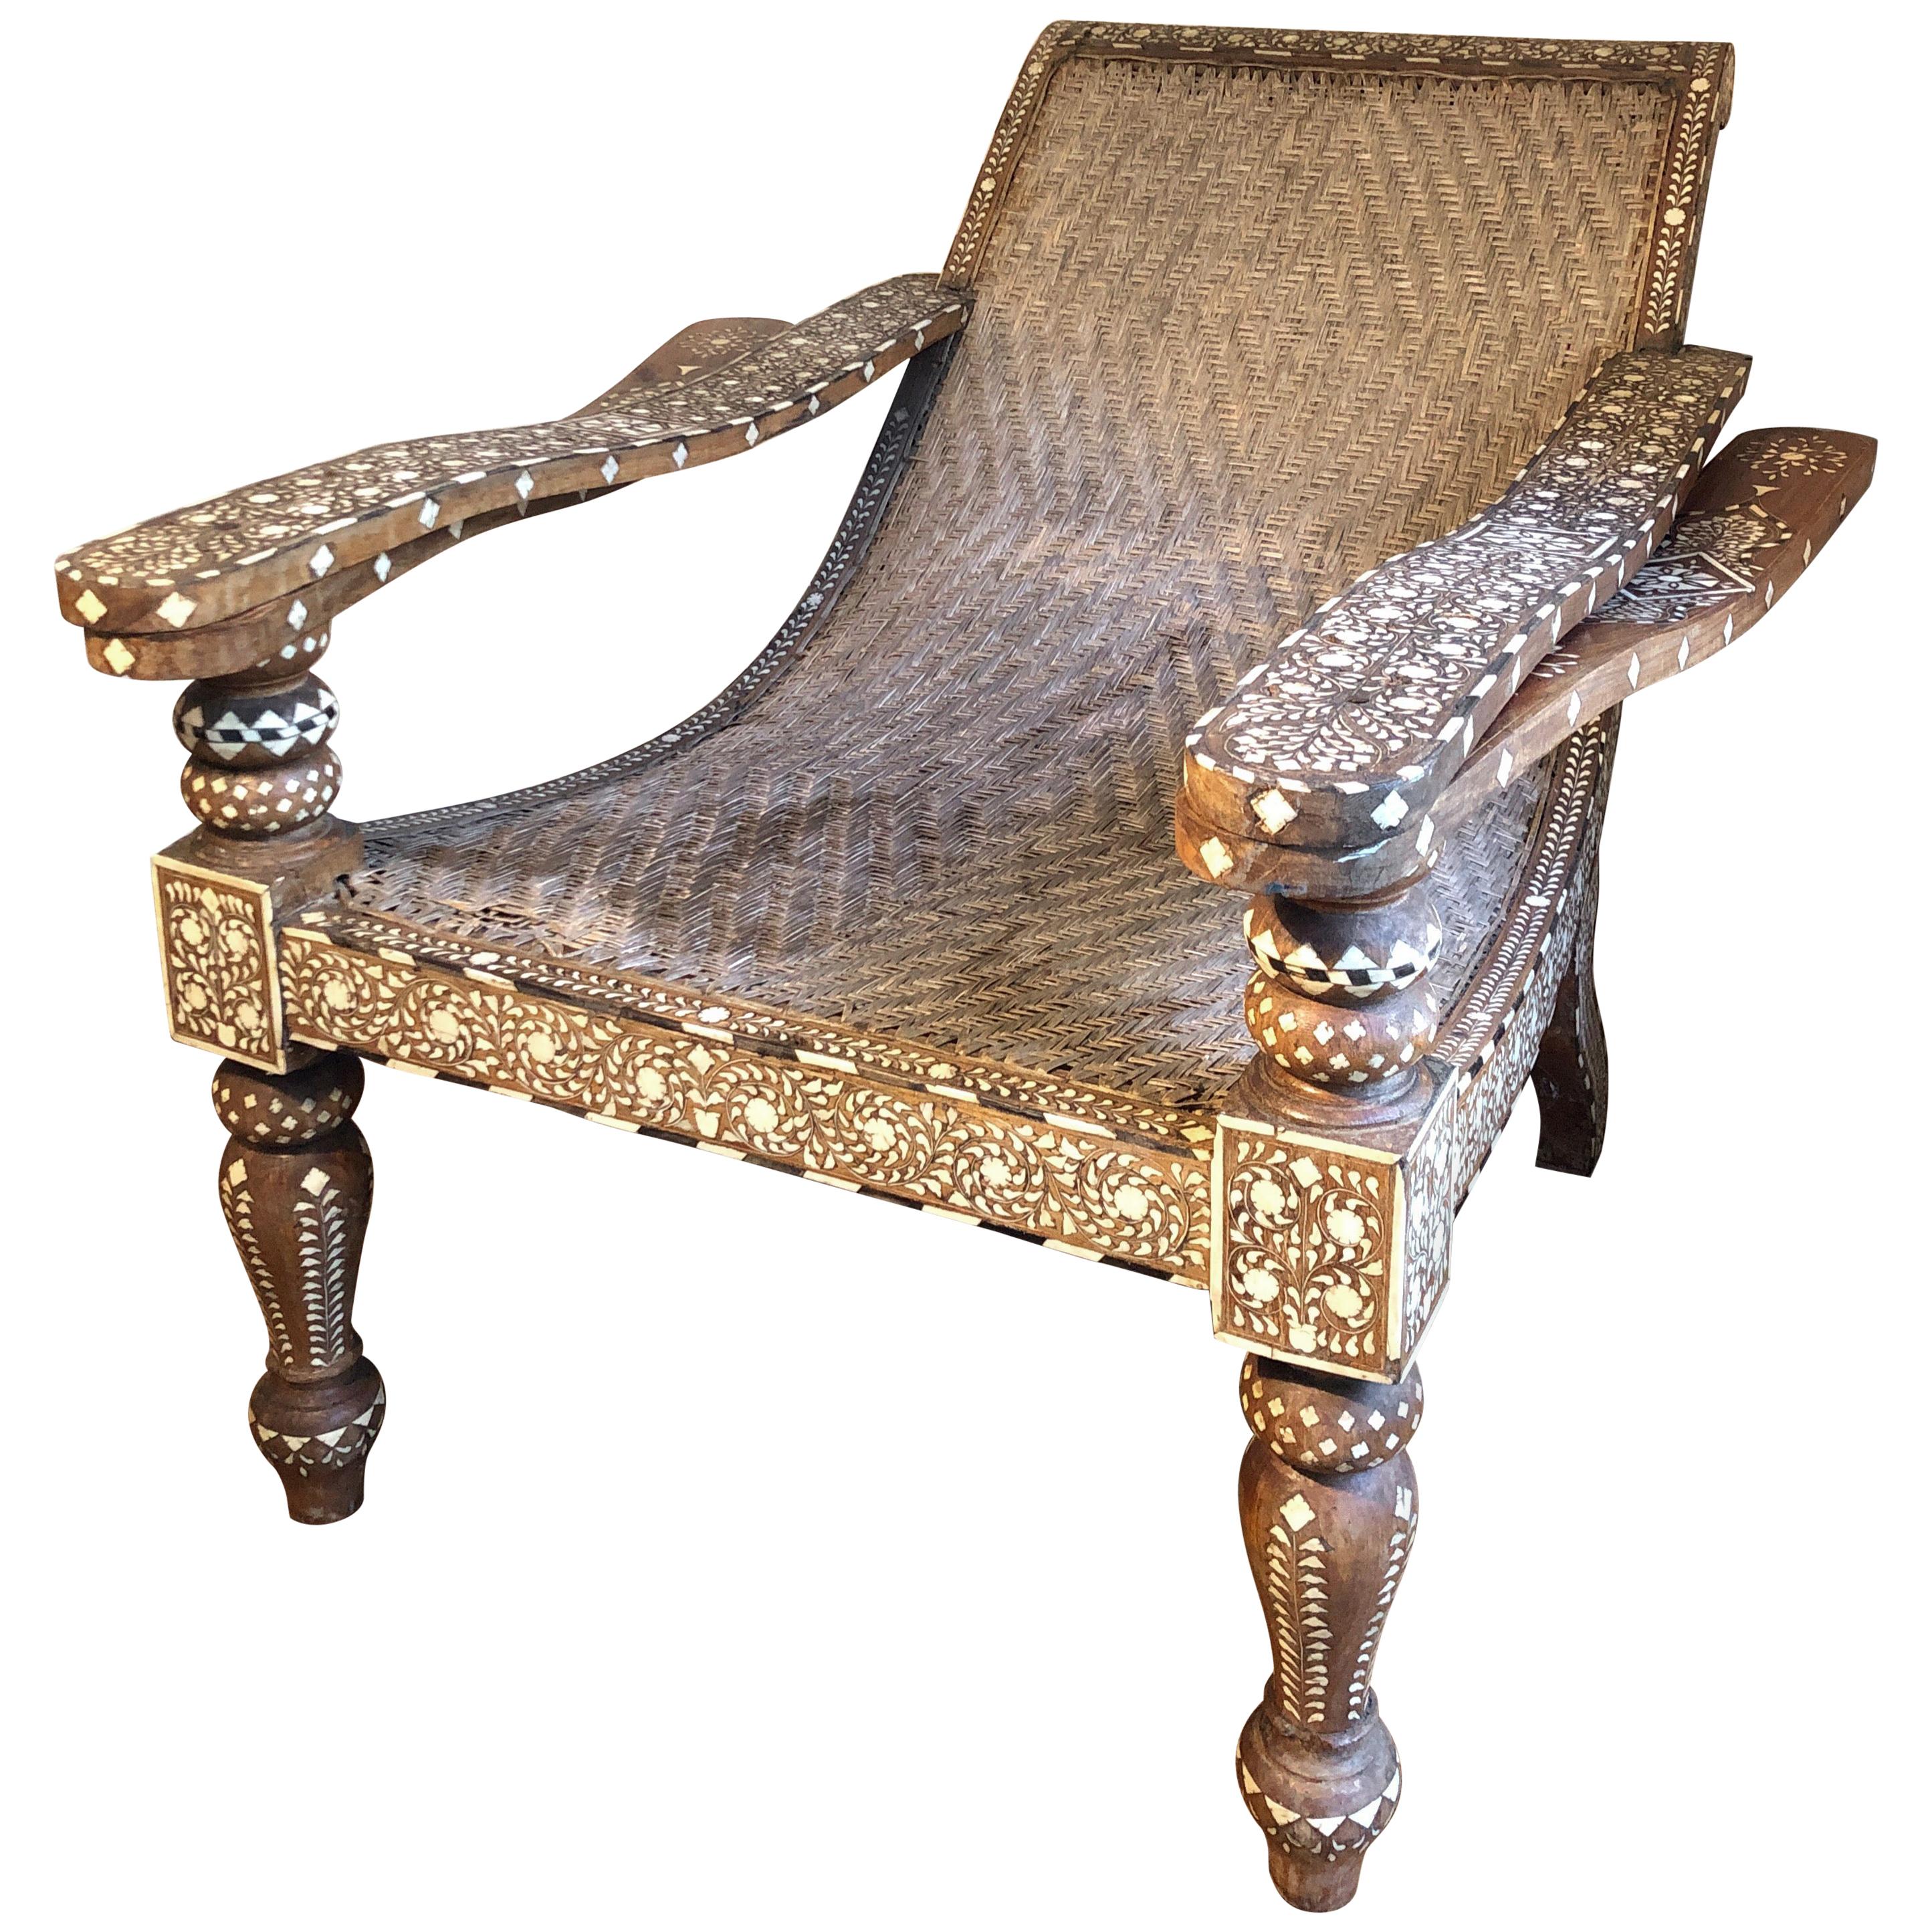 Rare Bone and Eboyn Inlaid Plantation Cane Chair, Anglo-Indian